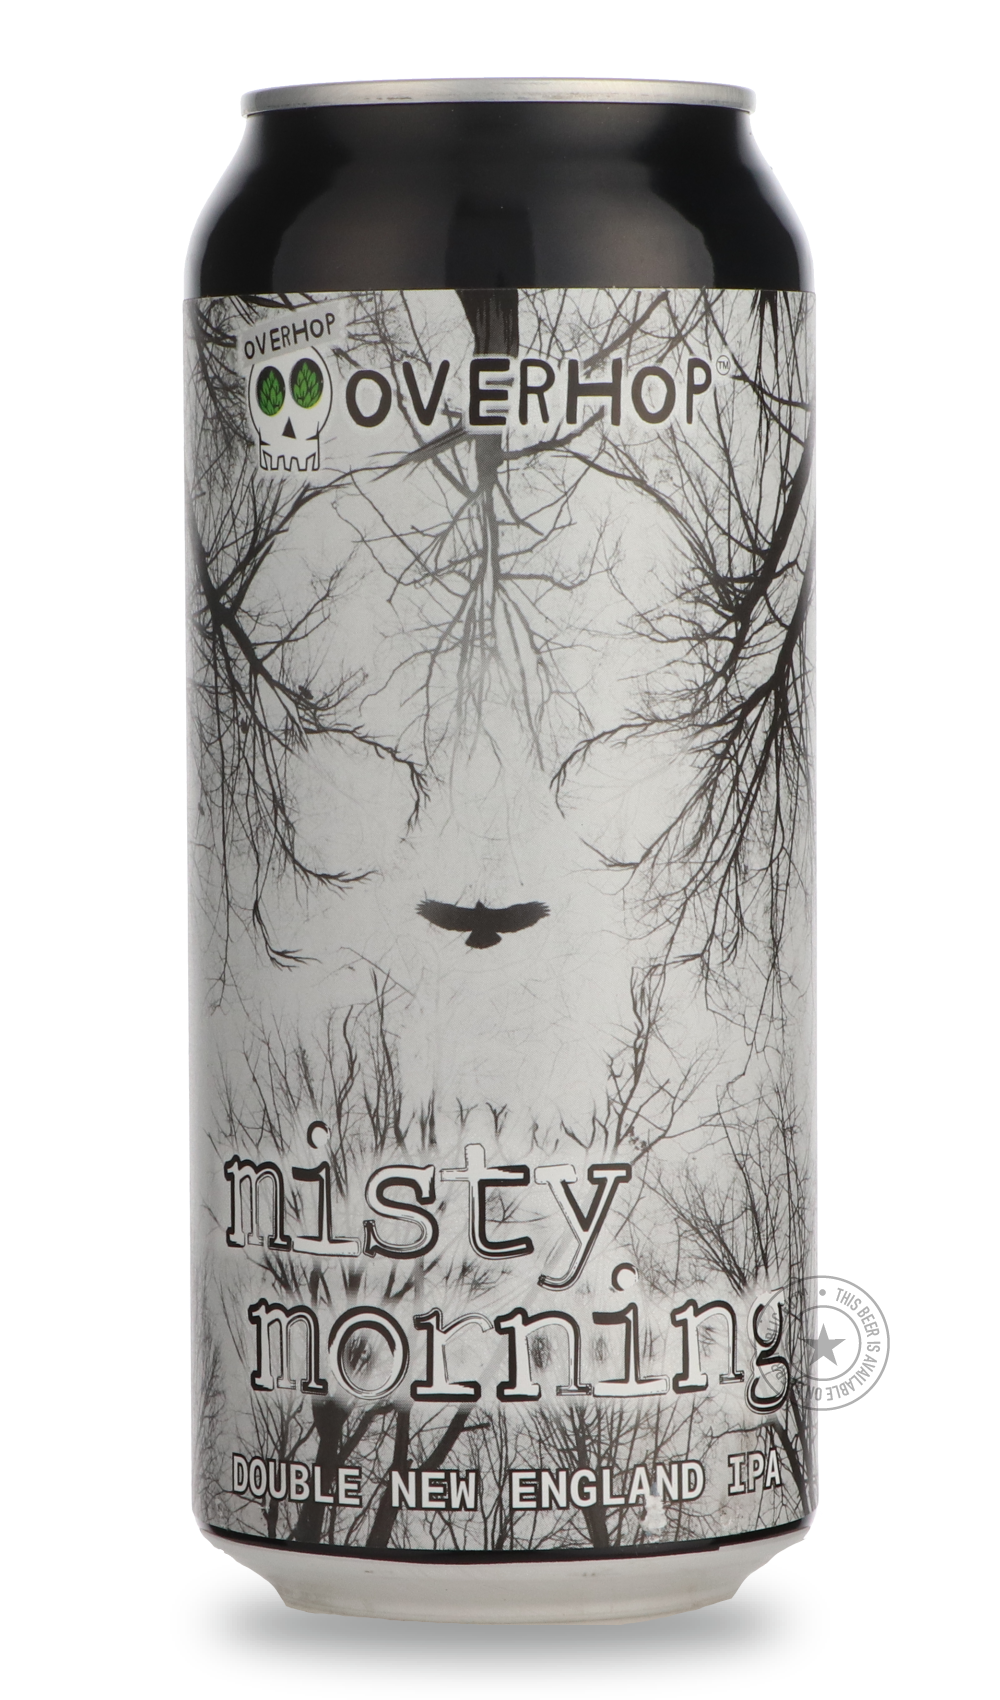 -OverHop Canada- Misty Morning-IPA- Only @ Beer Republic - The best online beer store for American & Canadian craft beer - Buy beer online from the USA and Canada - Bier online kopen - Amerikaans bier kopen - Craft beer store - Craft beer kopen - Amerikanisch bier kaufen - Bier online kaufen - Acheter biere online - IPA - Stout - Porter - New England IPA - Hazy IPA - Imperial Stout - Barrel Aged - Barrel Aged Imperial Stout - Brown - Dark beer - Blond - Blonde - Pilsner - Lager - Wheat - Weizen - Amber - Ba